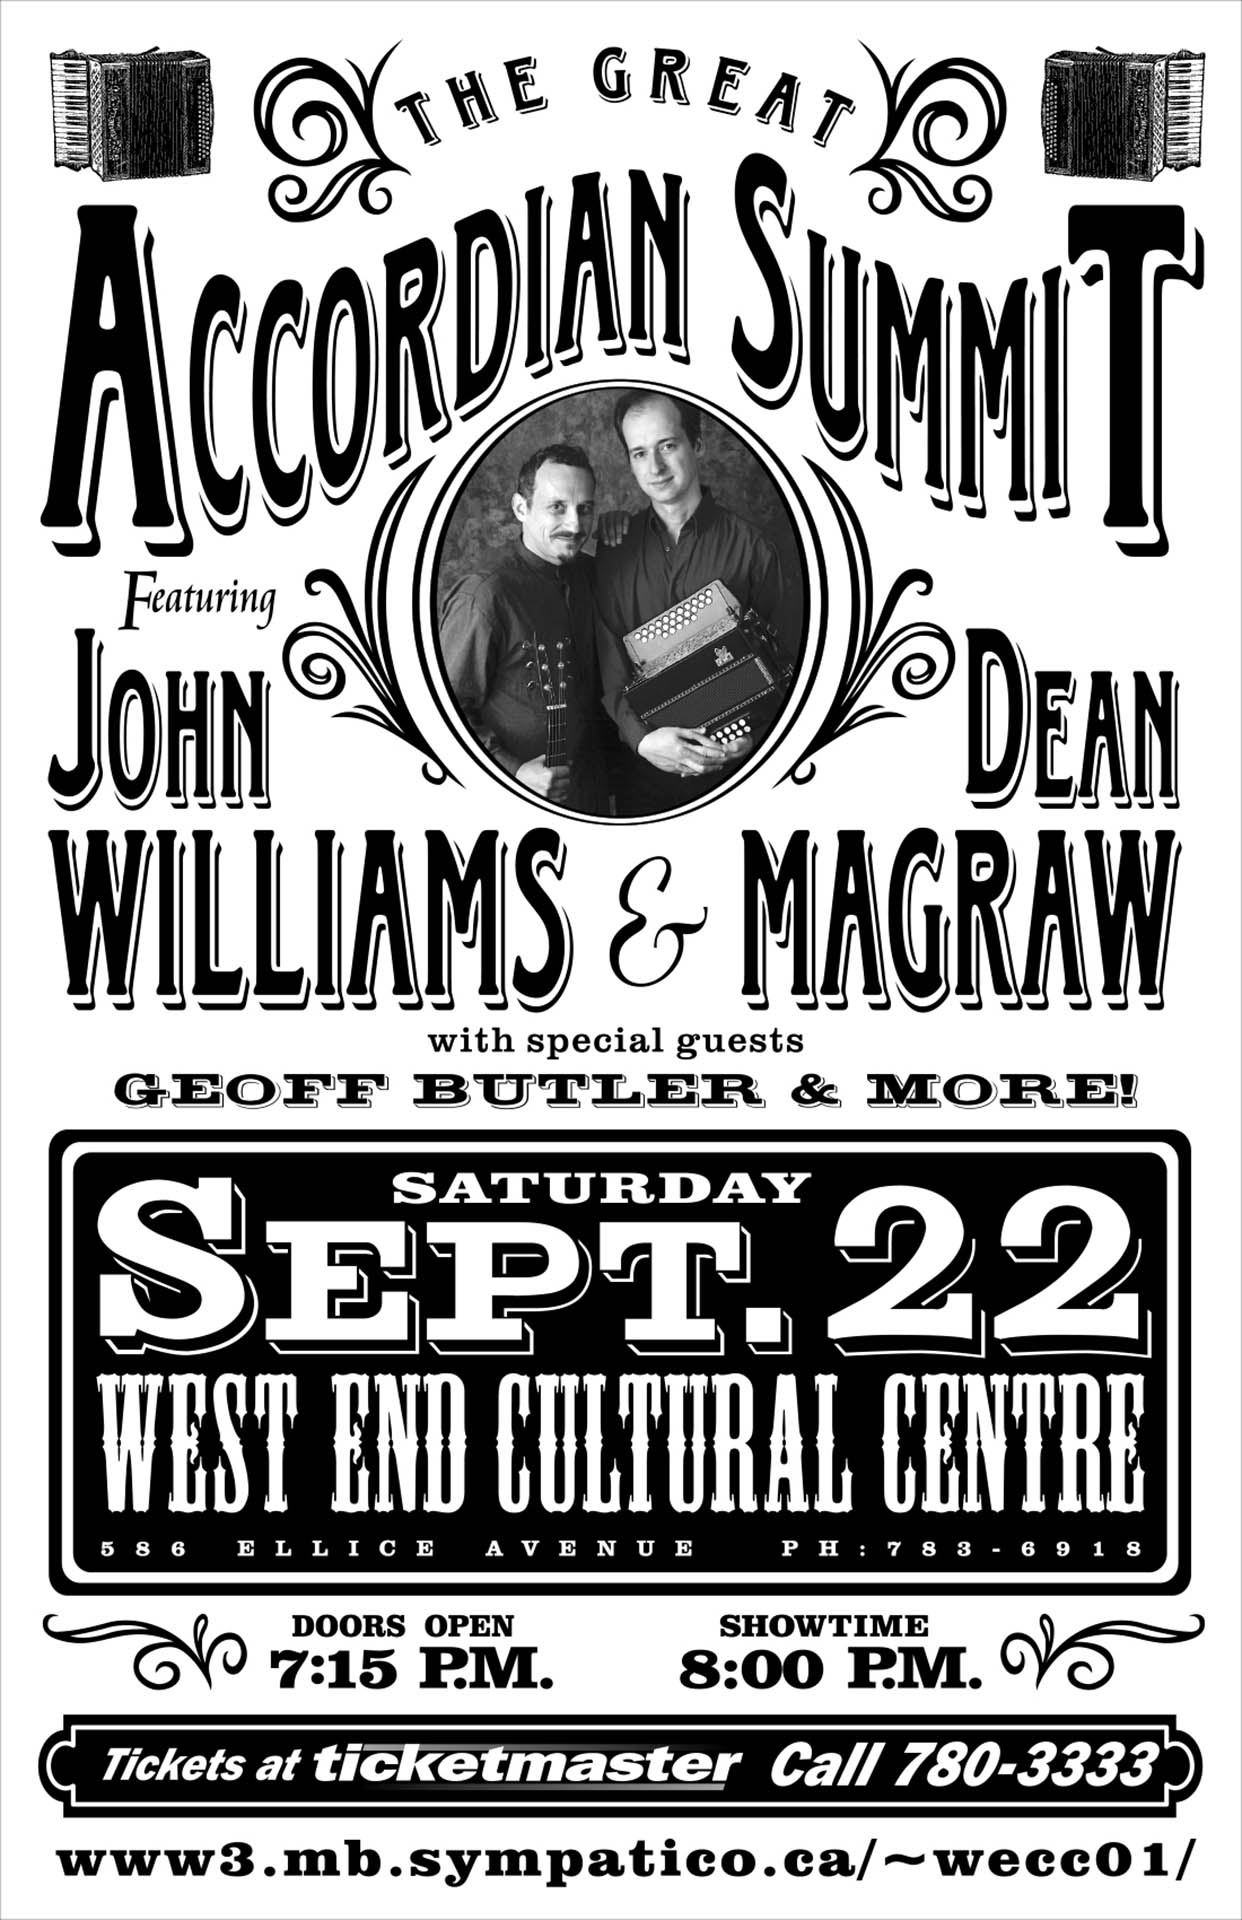 The Great Accordian Summit – 2001